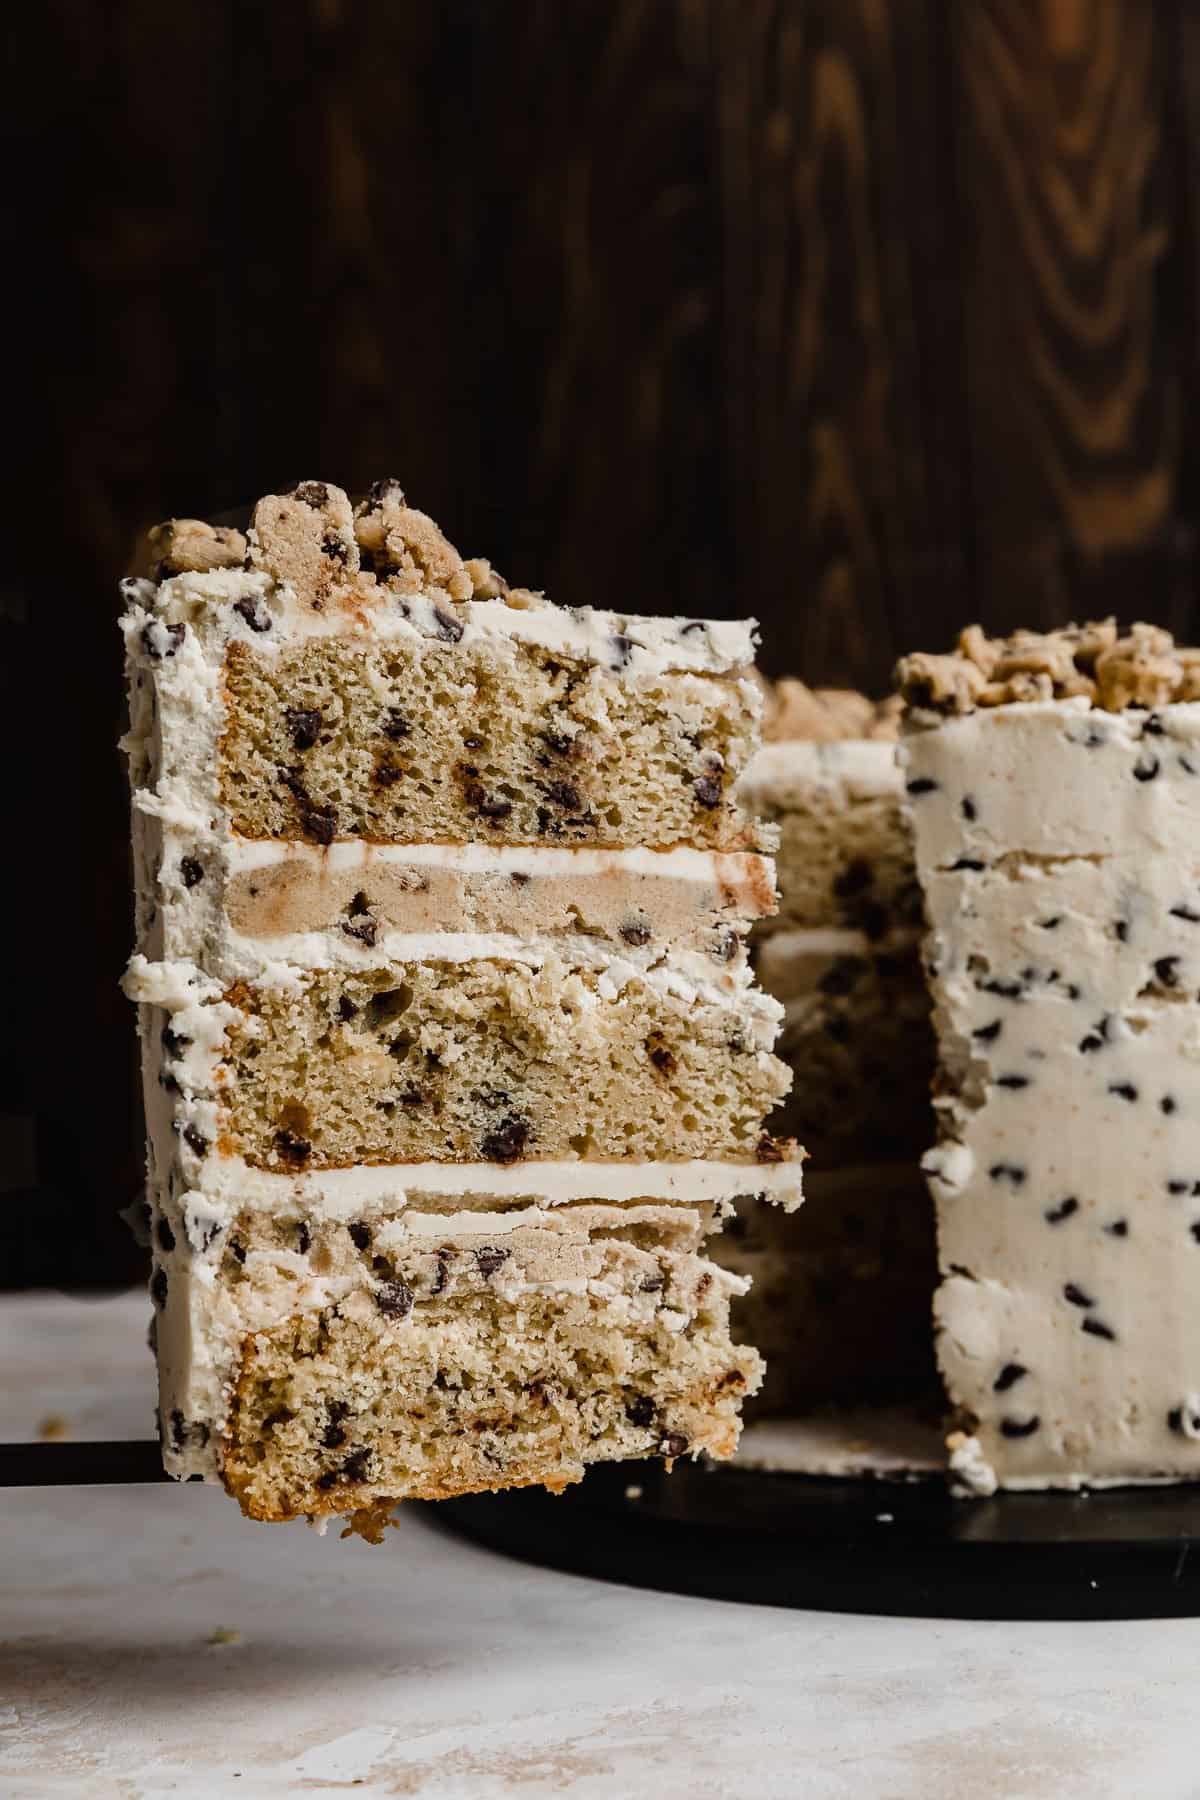 A slice of cookie dough layered cake on a serving spatula against a black background.